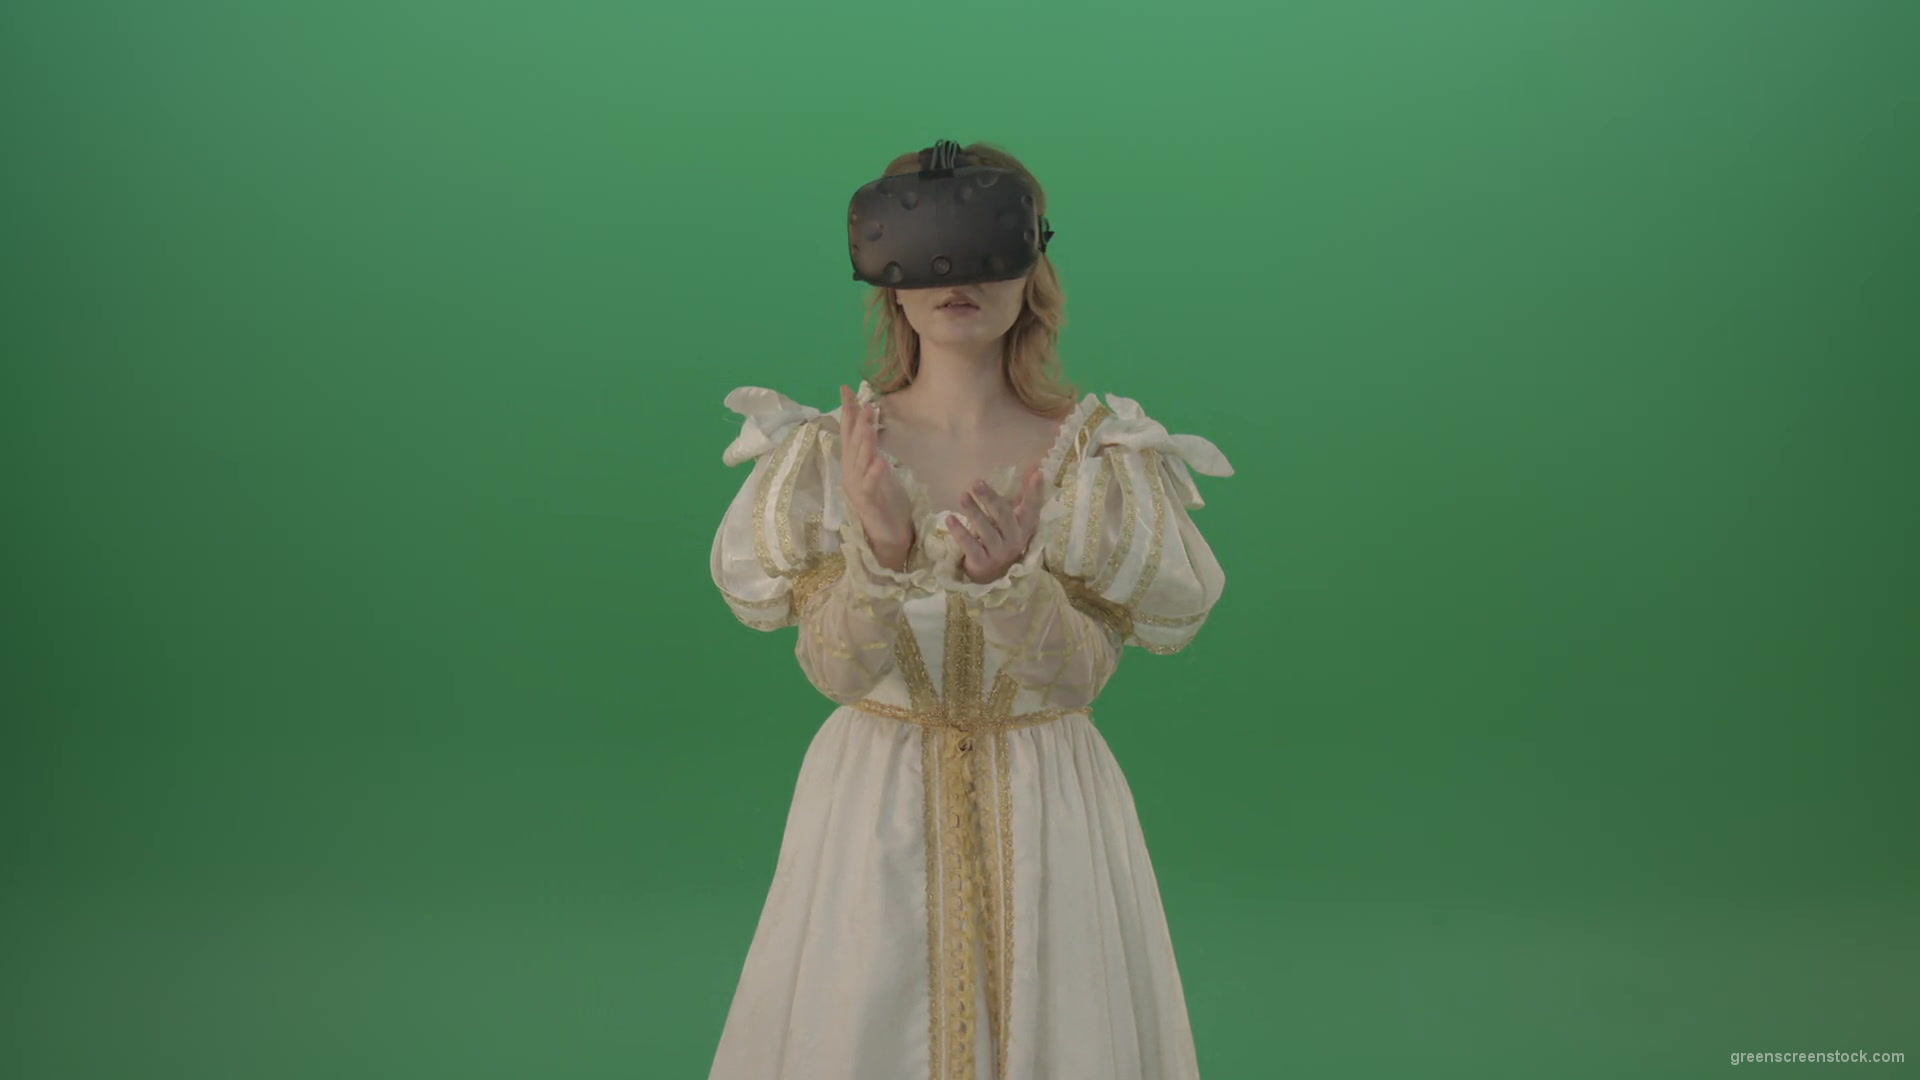 Girl-in-3-in-virtual-reality-has-swallowed-up-in-another-three-dimensional-world-isolated-on-green-screen-1920_007 Green Screen Stock